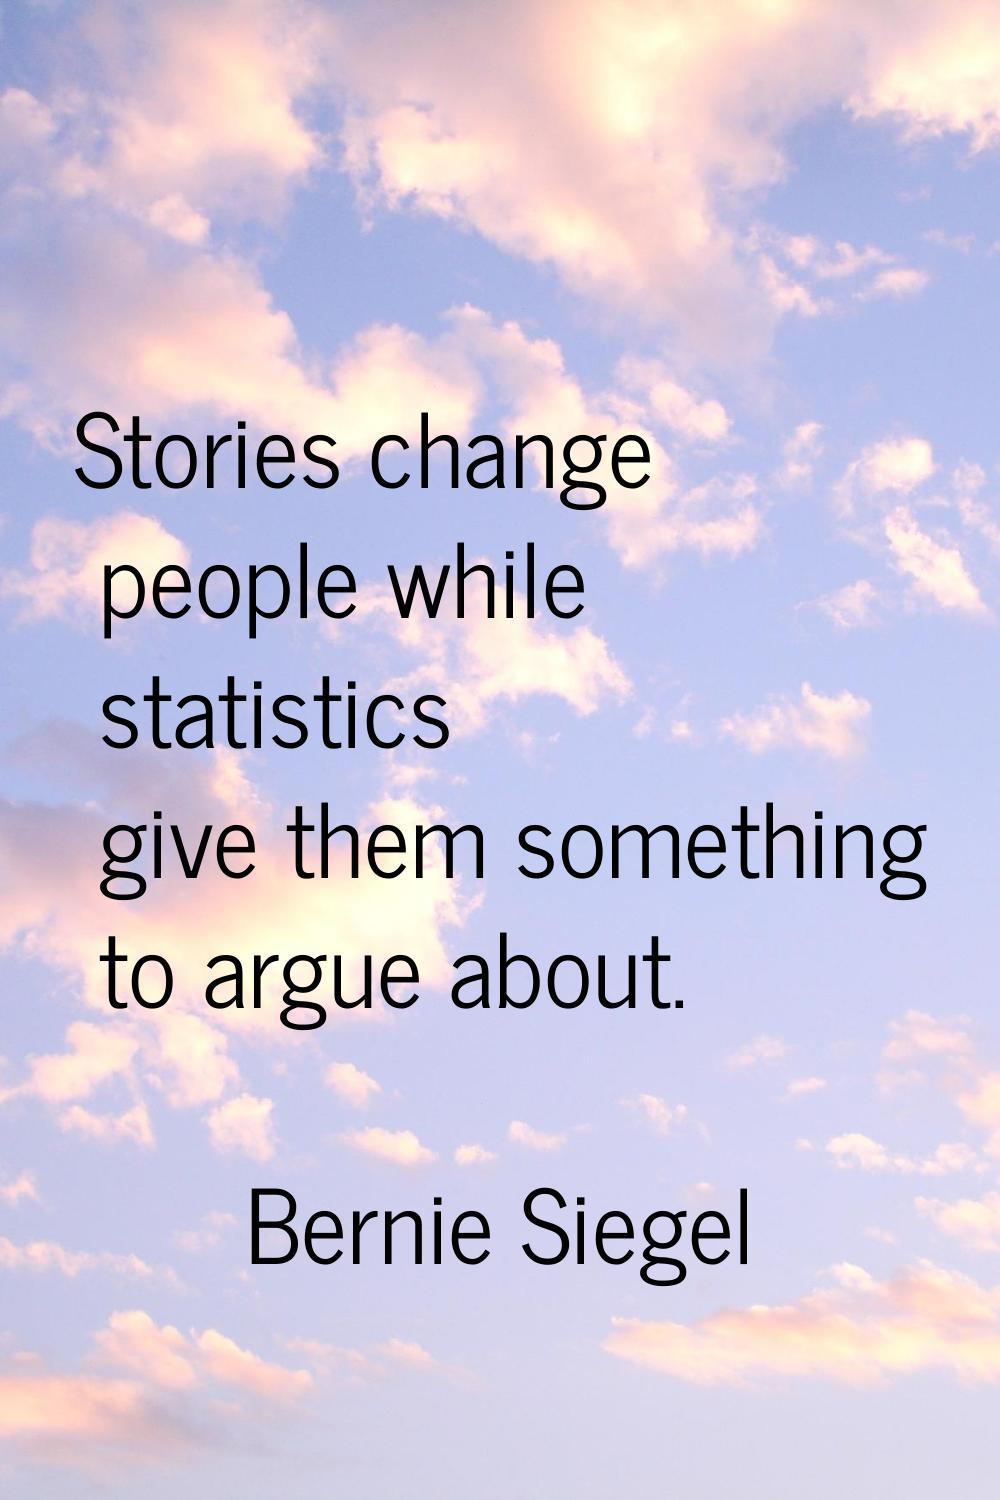 Stories change people while statistics give them something to argue about.